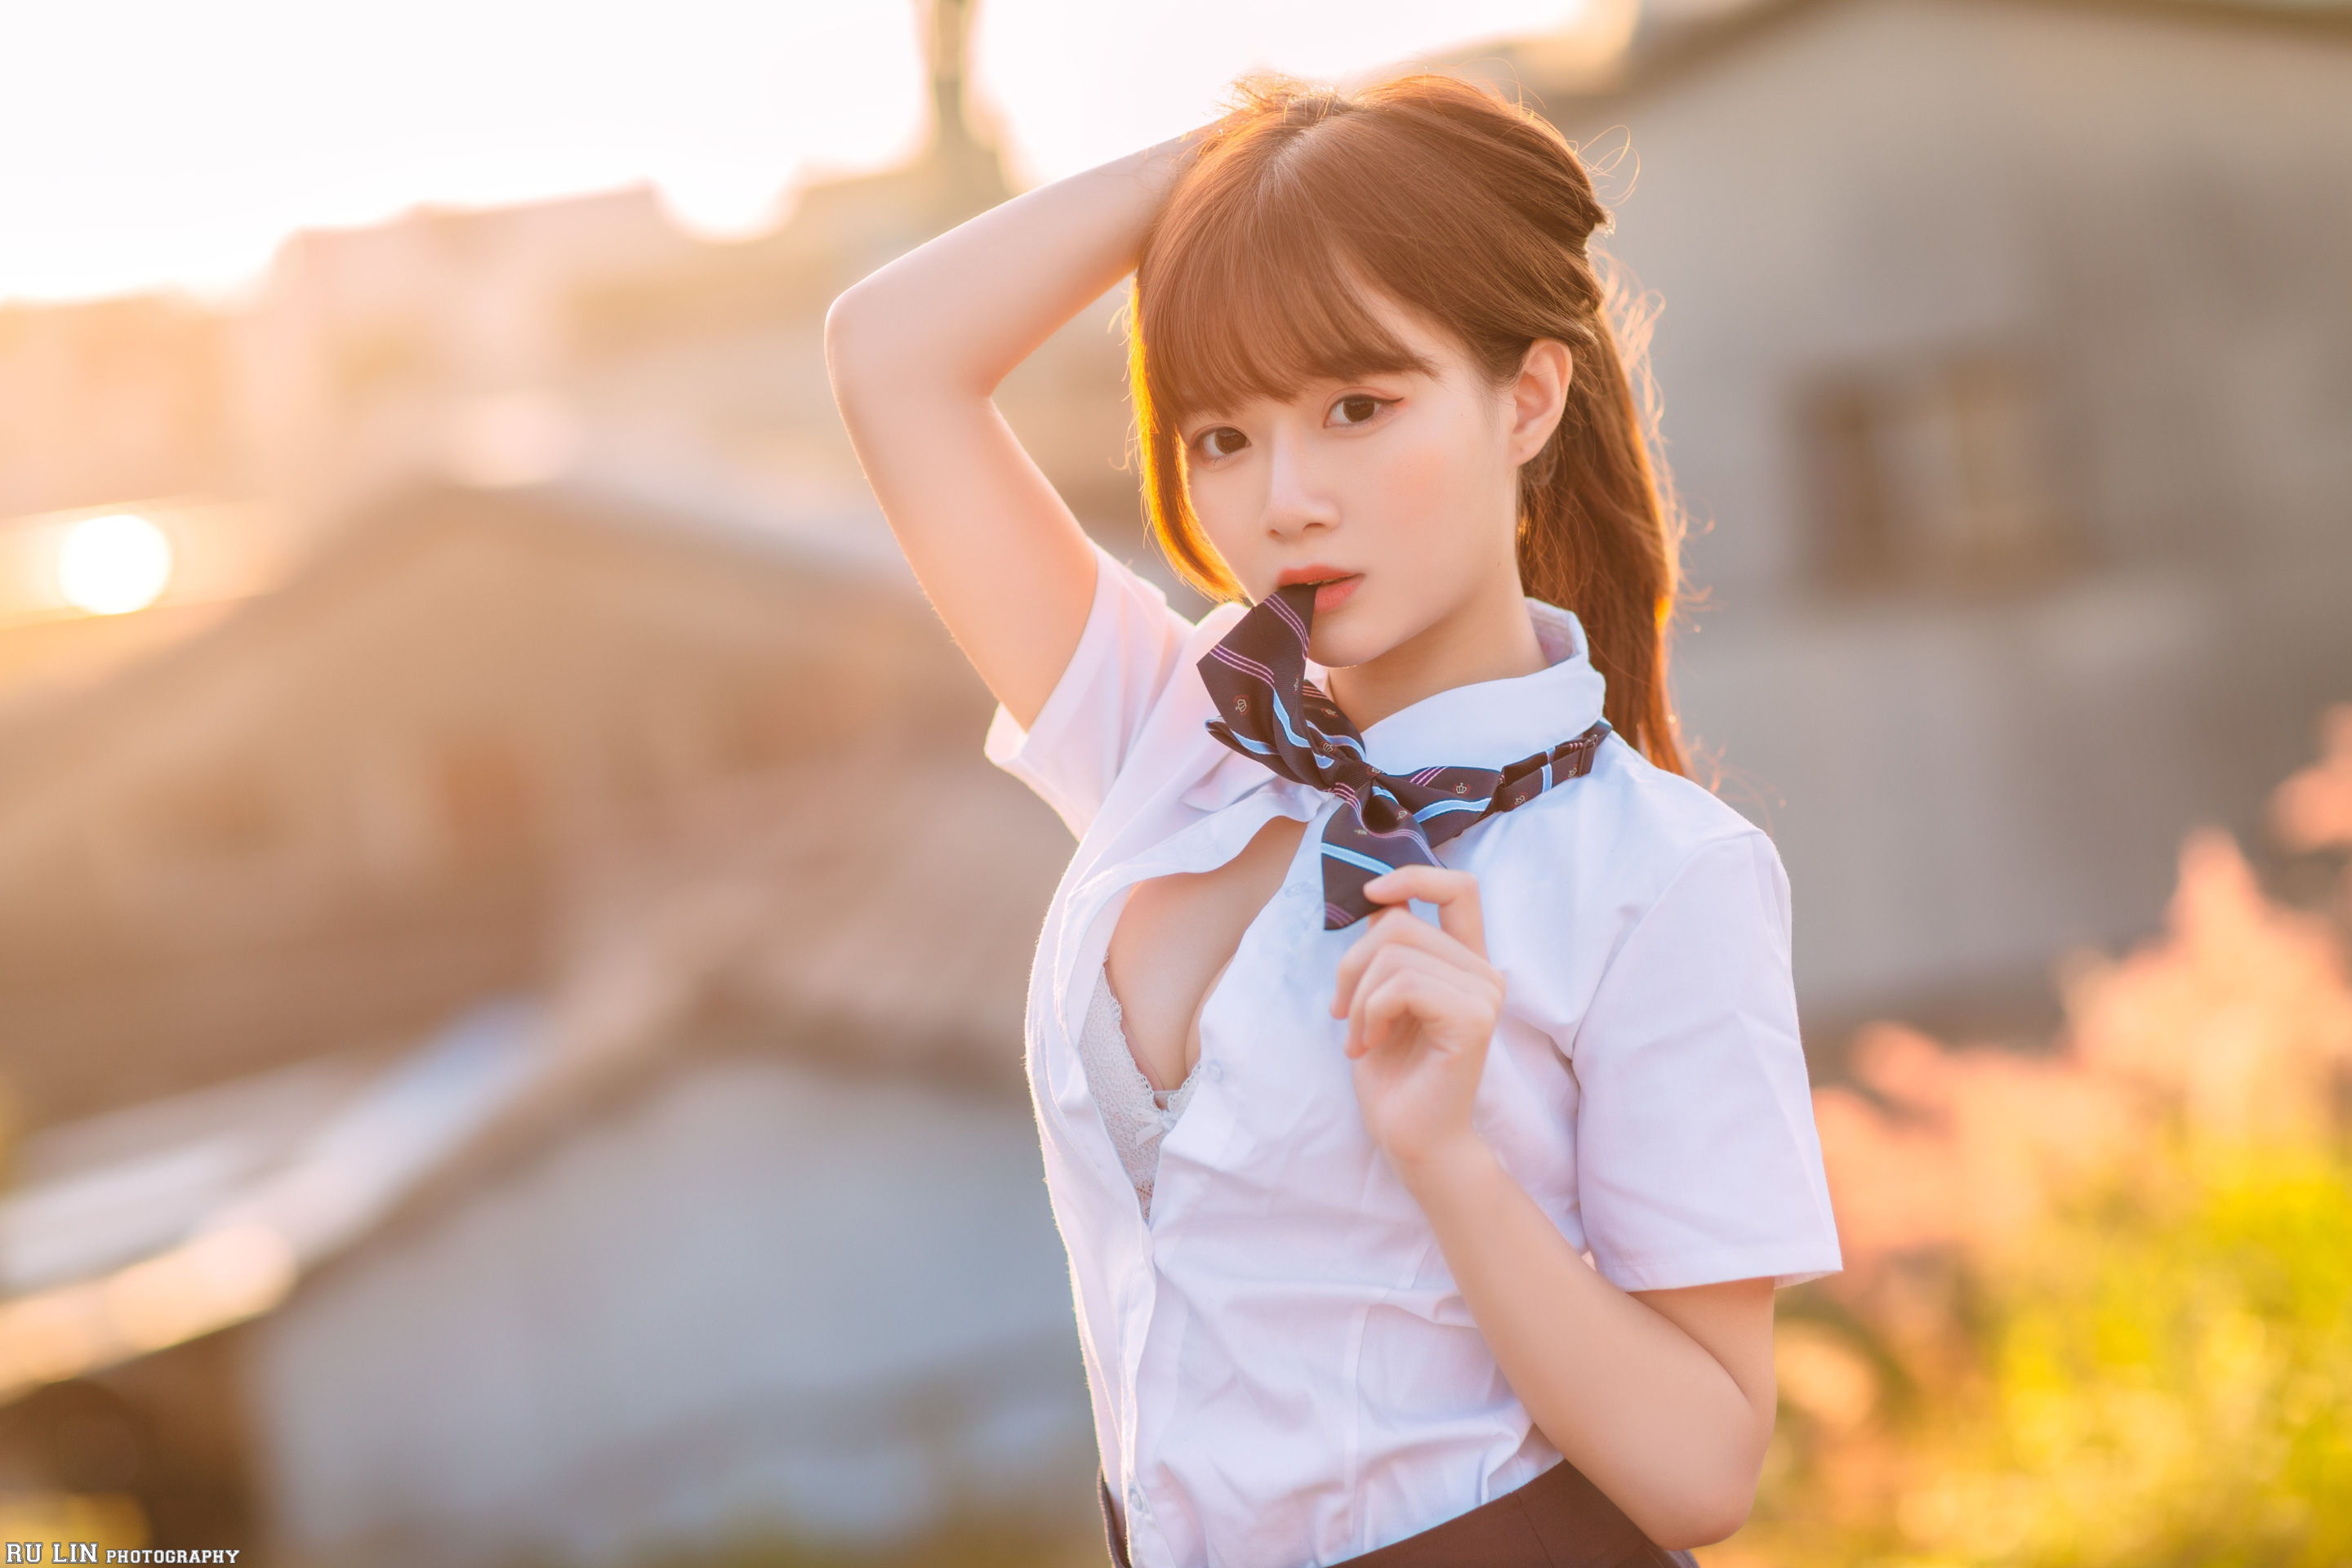 People 2880x1920 Asian school uniform depth of field brunette one arm up white skirt unbuttoned cleavage white bra biting clothes women outdoors outdoors schoolgirl bow tie blurred blurry background model looking at viewer sunset sunset glow open shirt building bra house bangs short sleeves standing women Winnie Qian